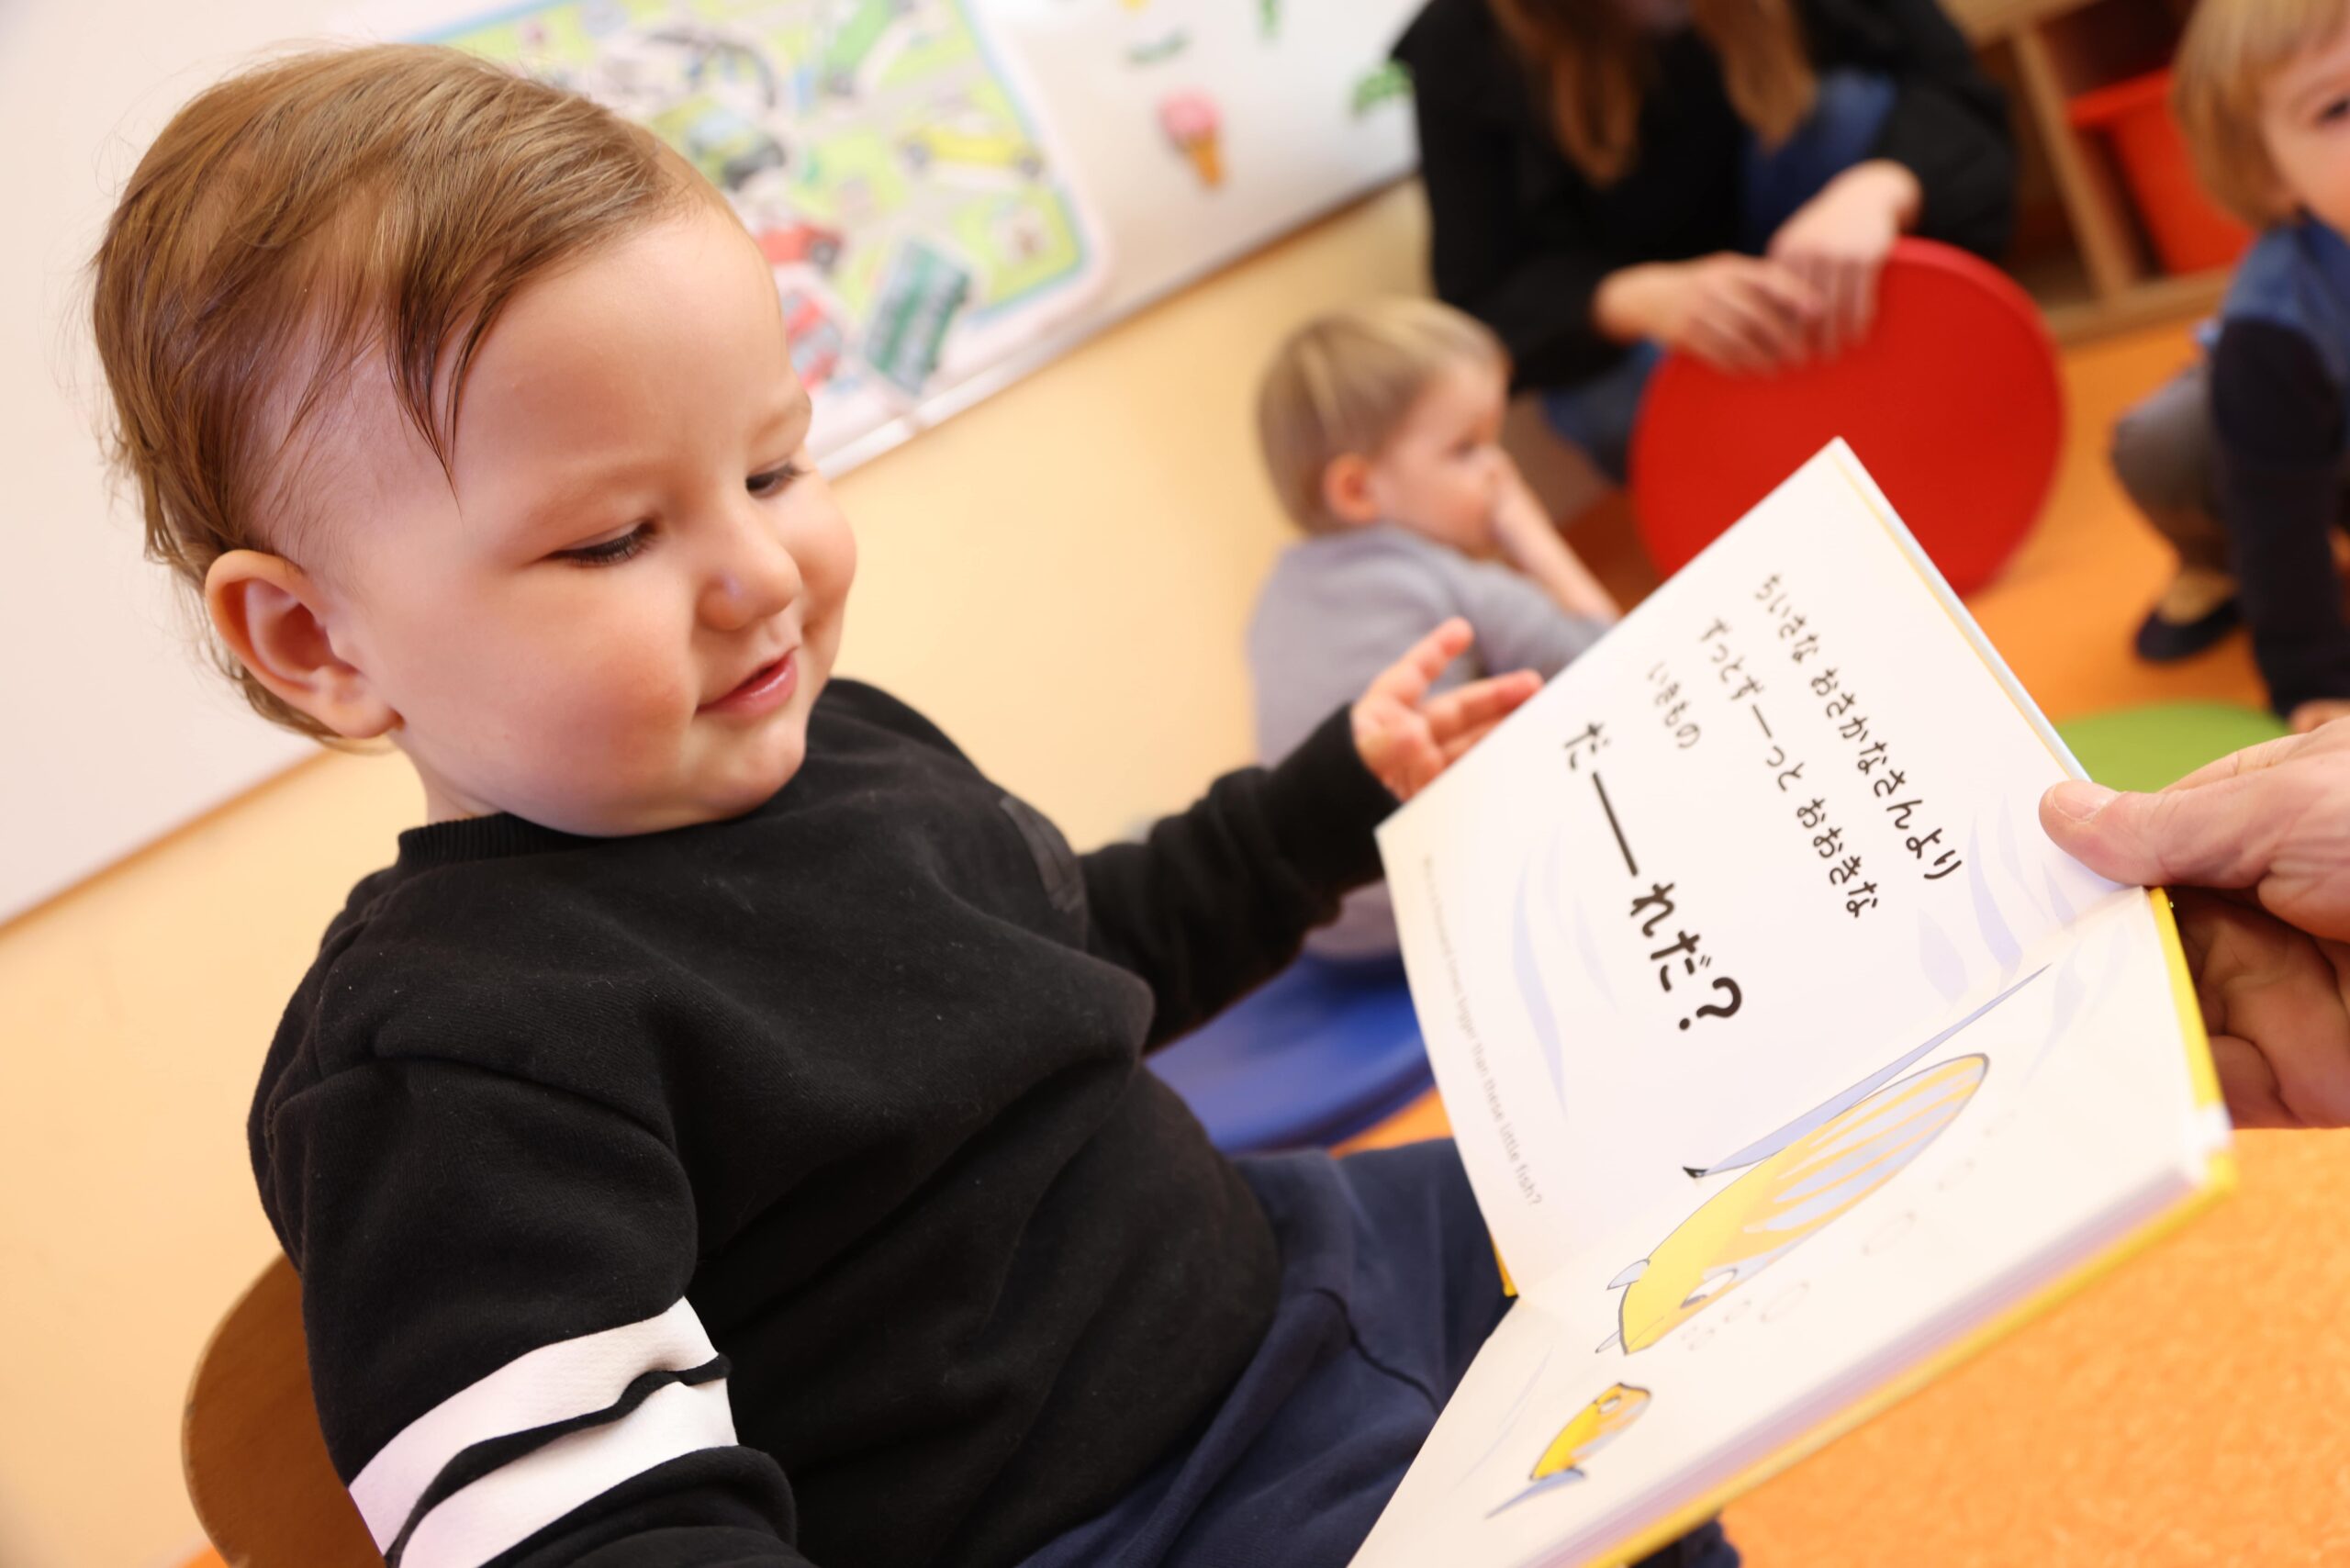 Language pre-school – what are the advantages of multilingual education?